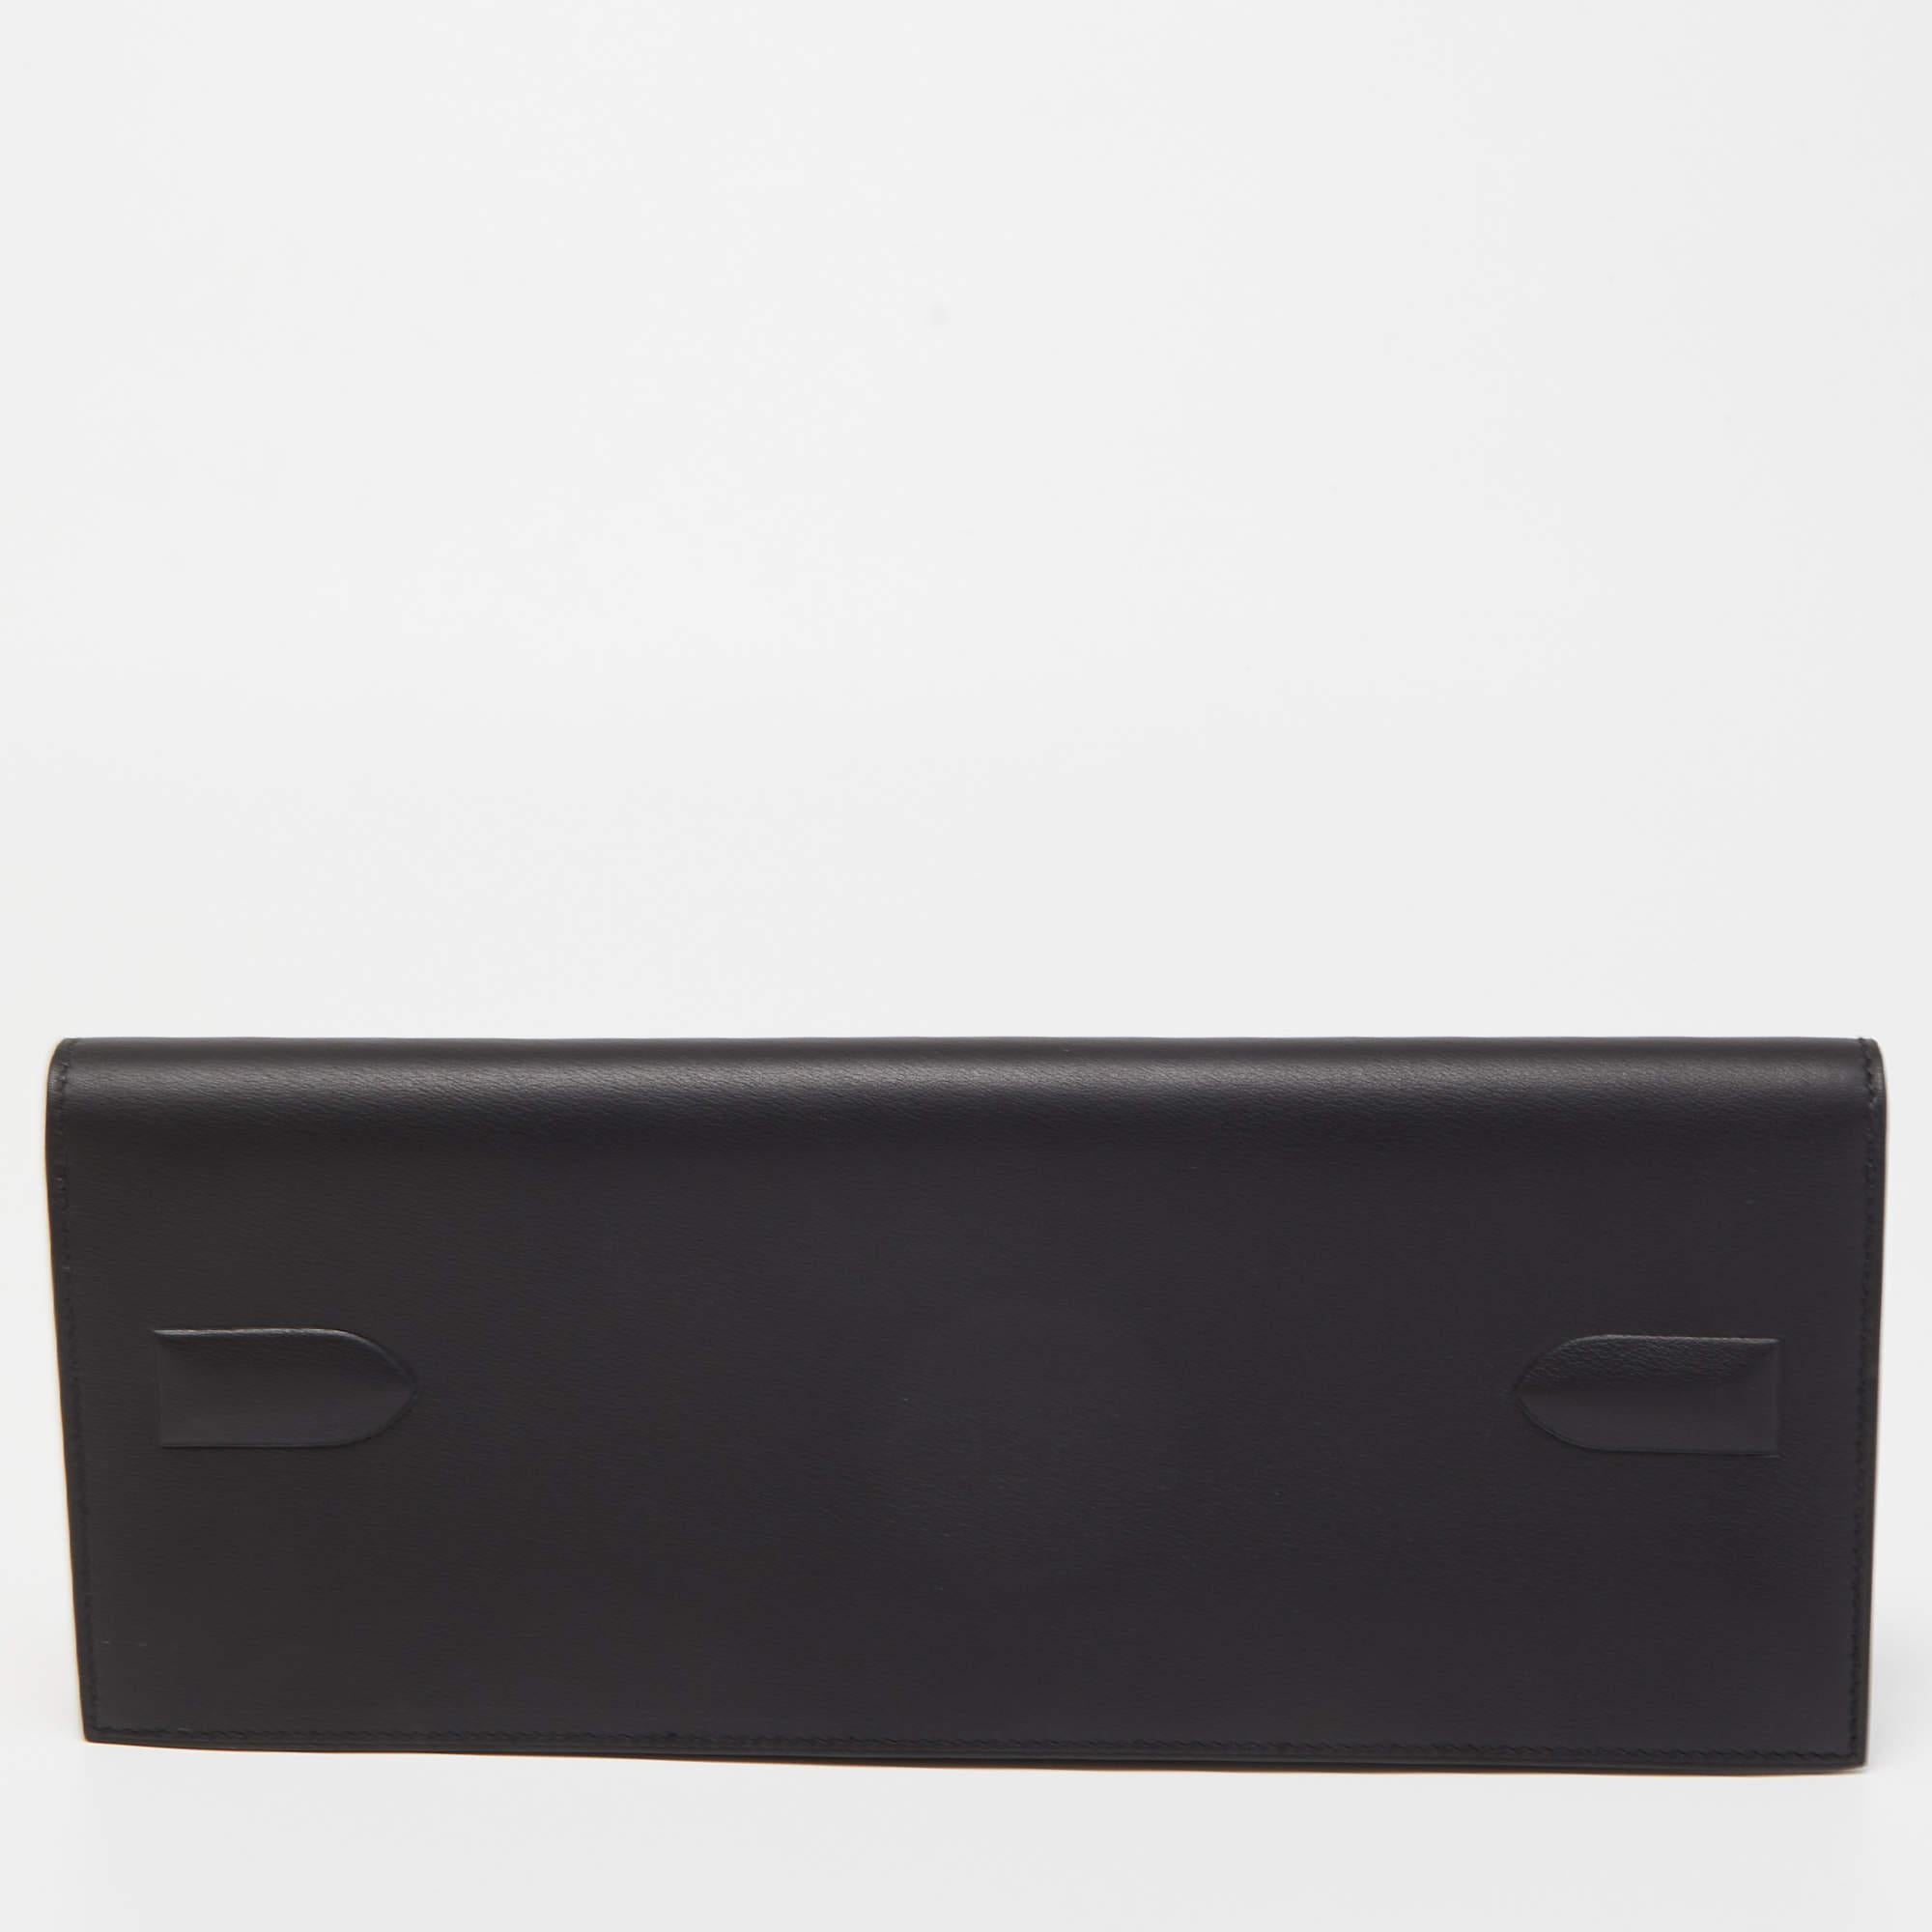 The Hermès Shadow Kelly clutch exudes elegance and sophistication. Crafted from luxurious black Swift leather, it features the iconic Kelly bag silhouette in a compact clutch form. The sleek design is accentuated by clean lines, making it a timeless